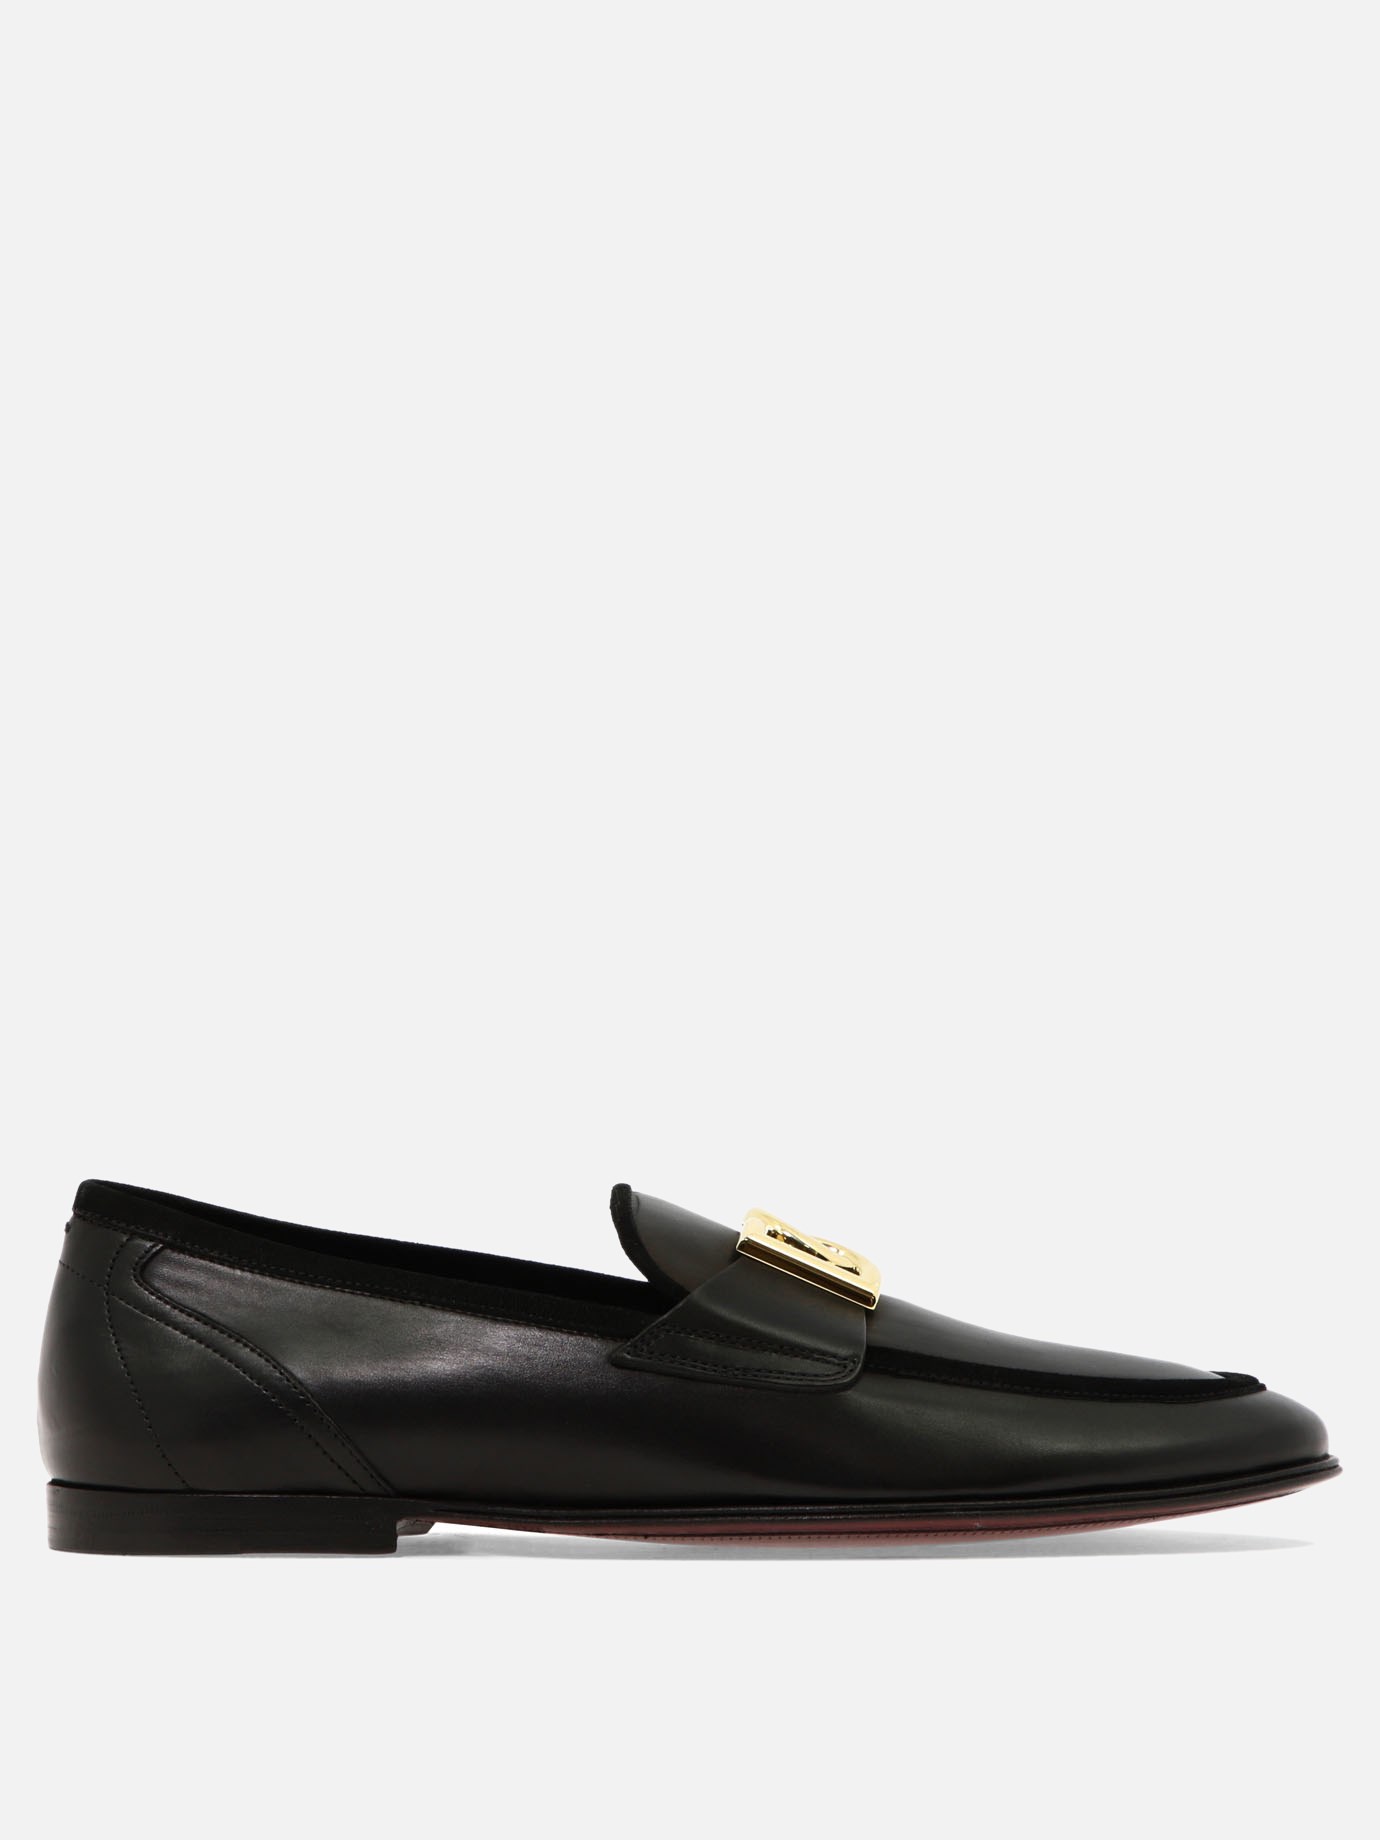  Ariosto  loafers by Dolce & Gabbana